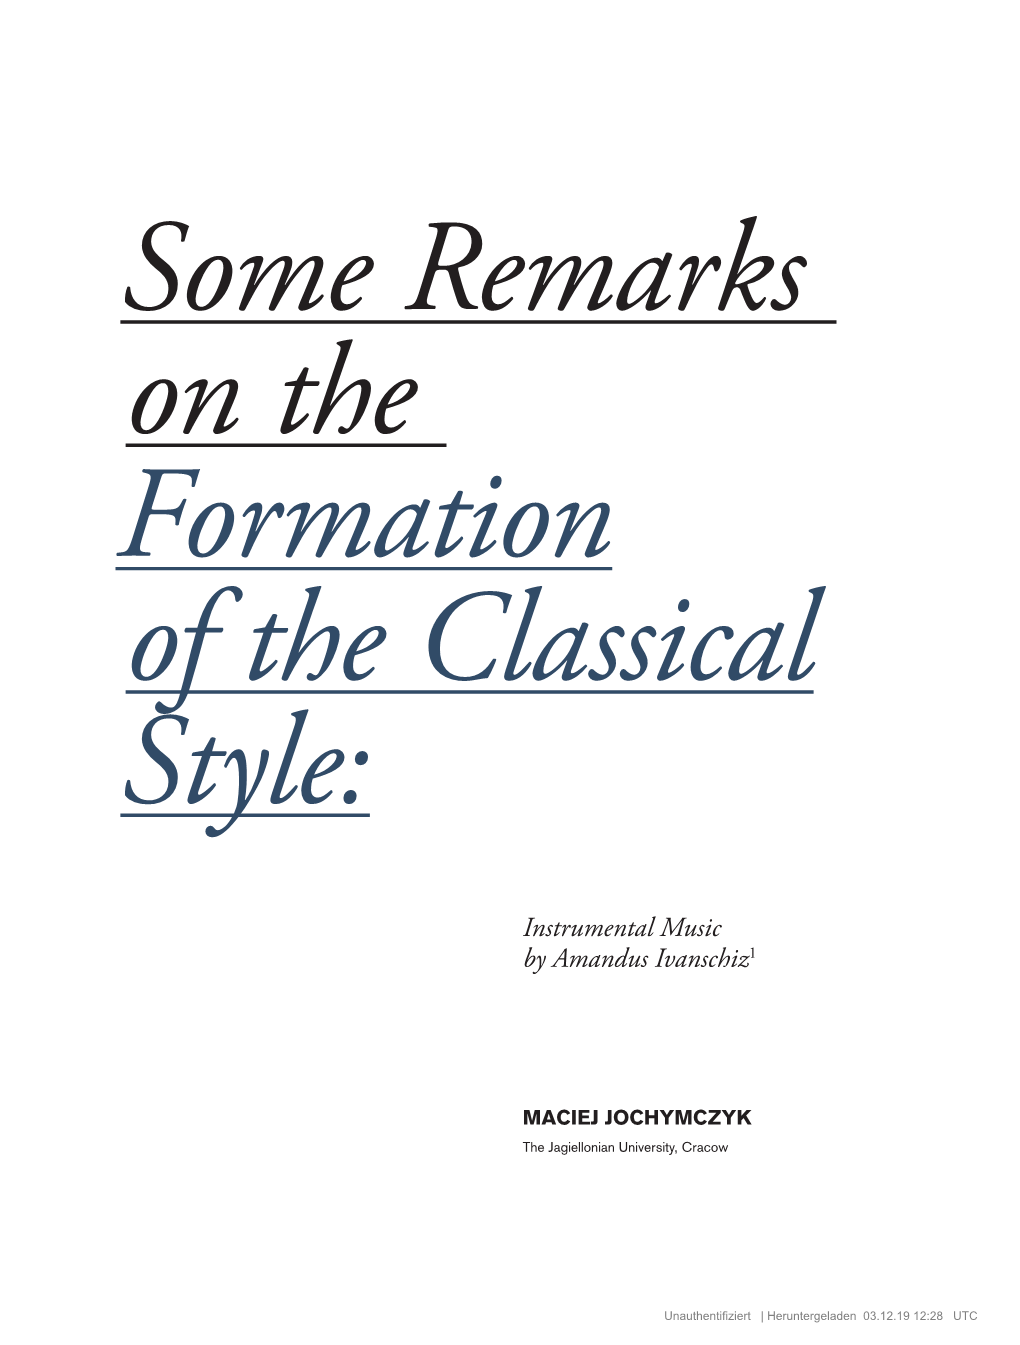 Some Remarks on the Formation of the Classical Style: Instrumental Music by Amandus Ivanschiz